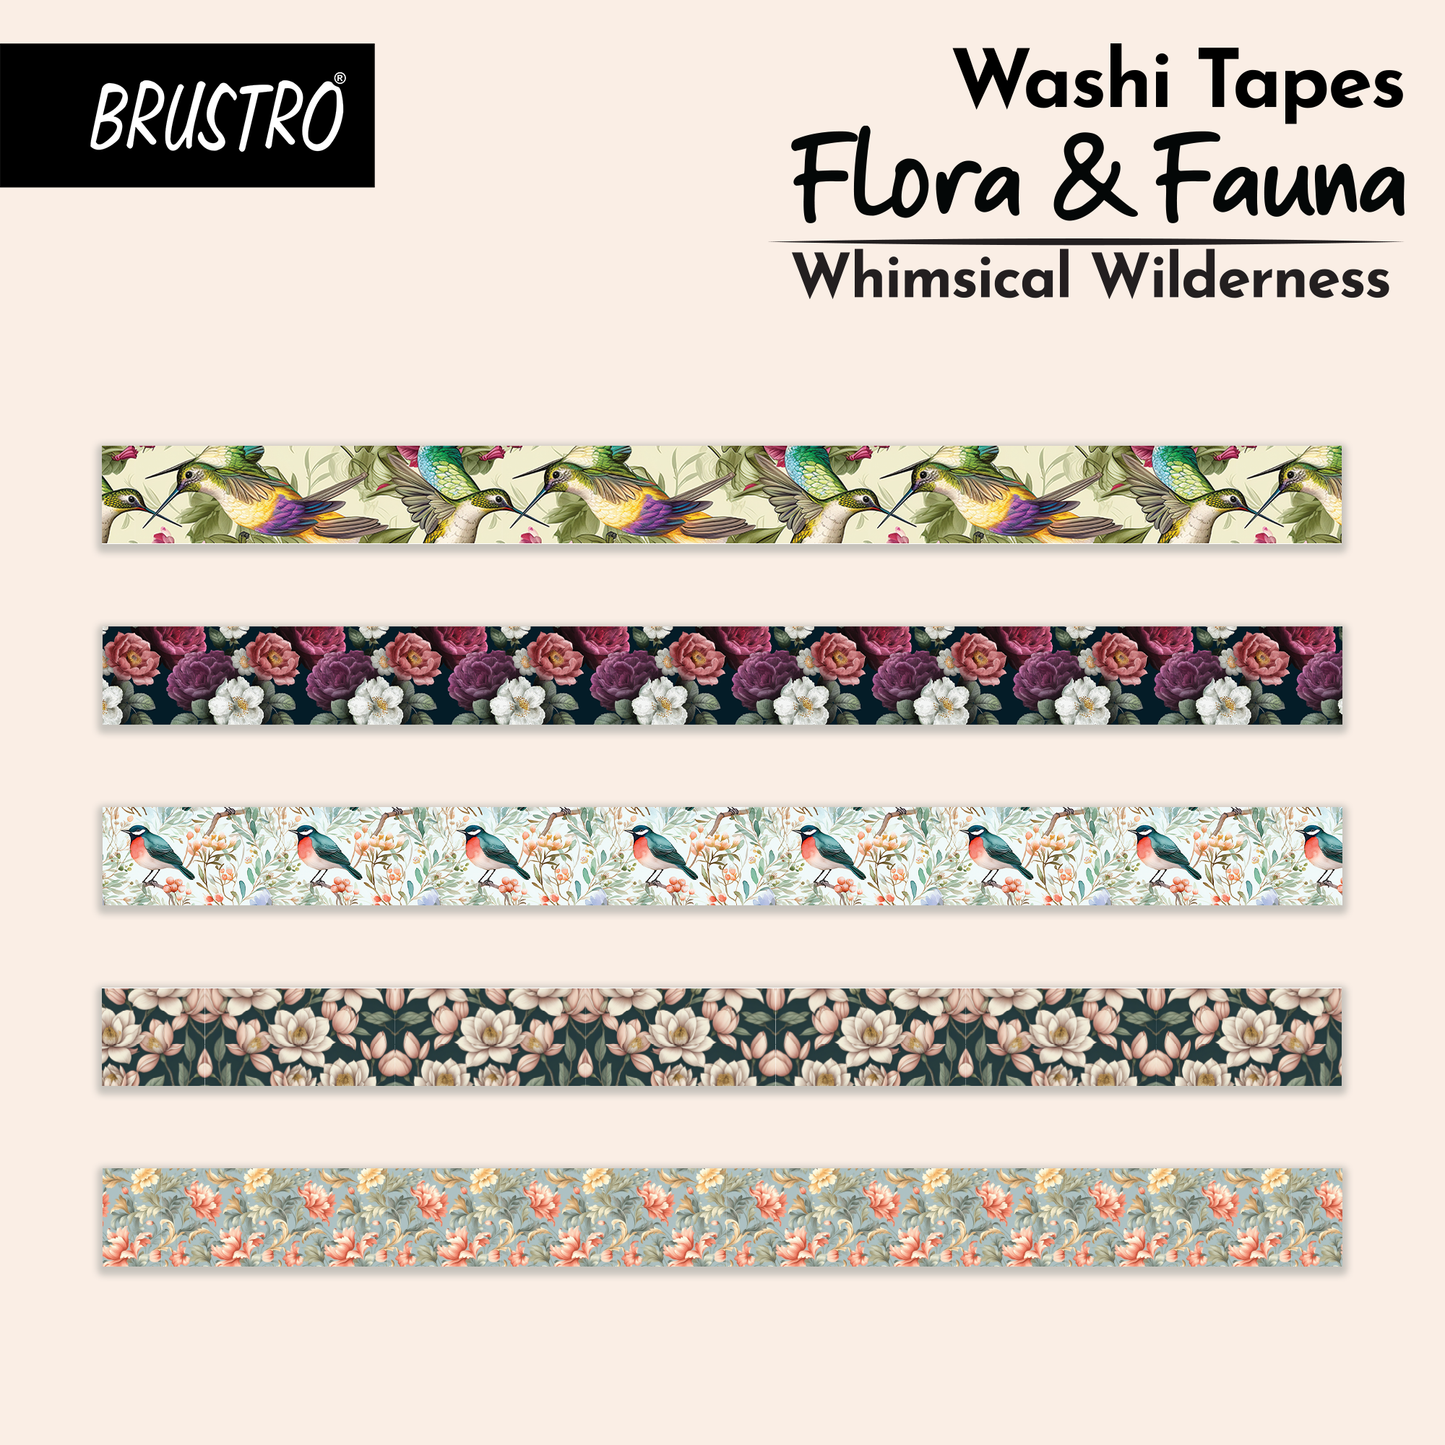 BRUSTRO Washi Tapes Flora and Fauna Shade, 15 mm x 5 mtrs (set of 5)